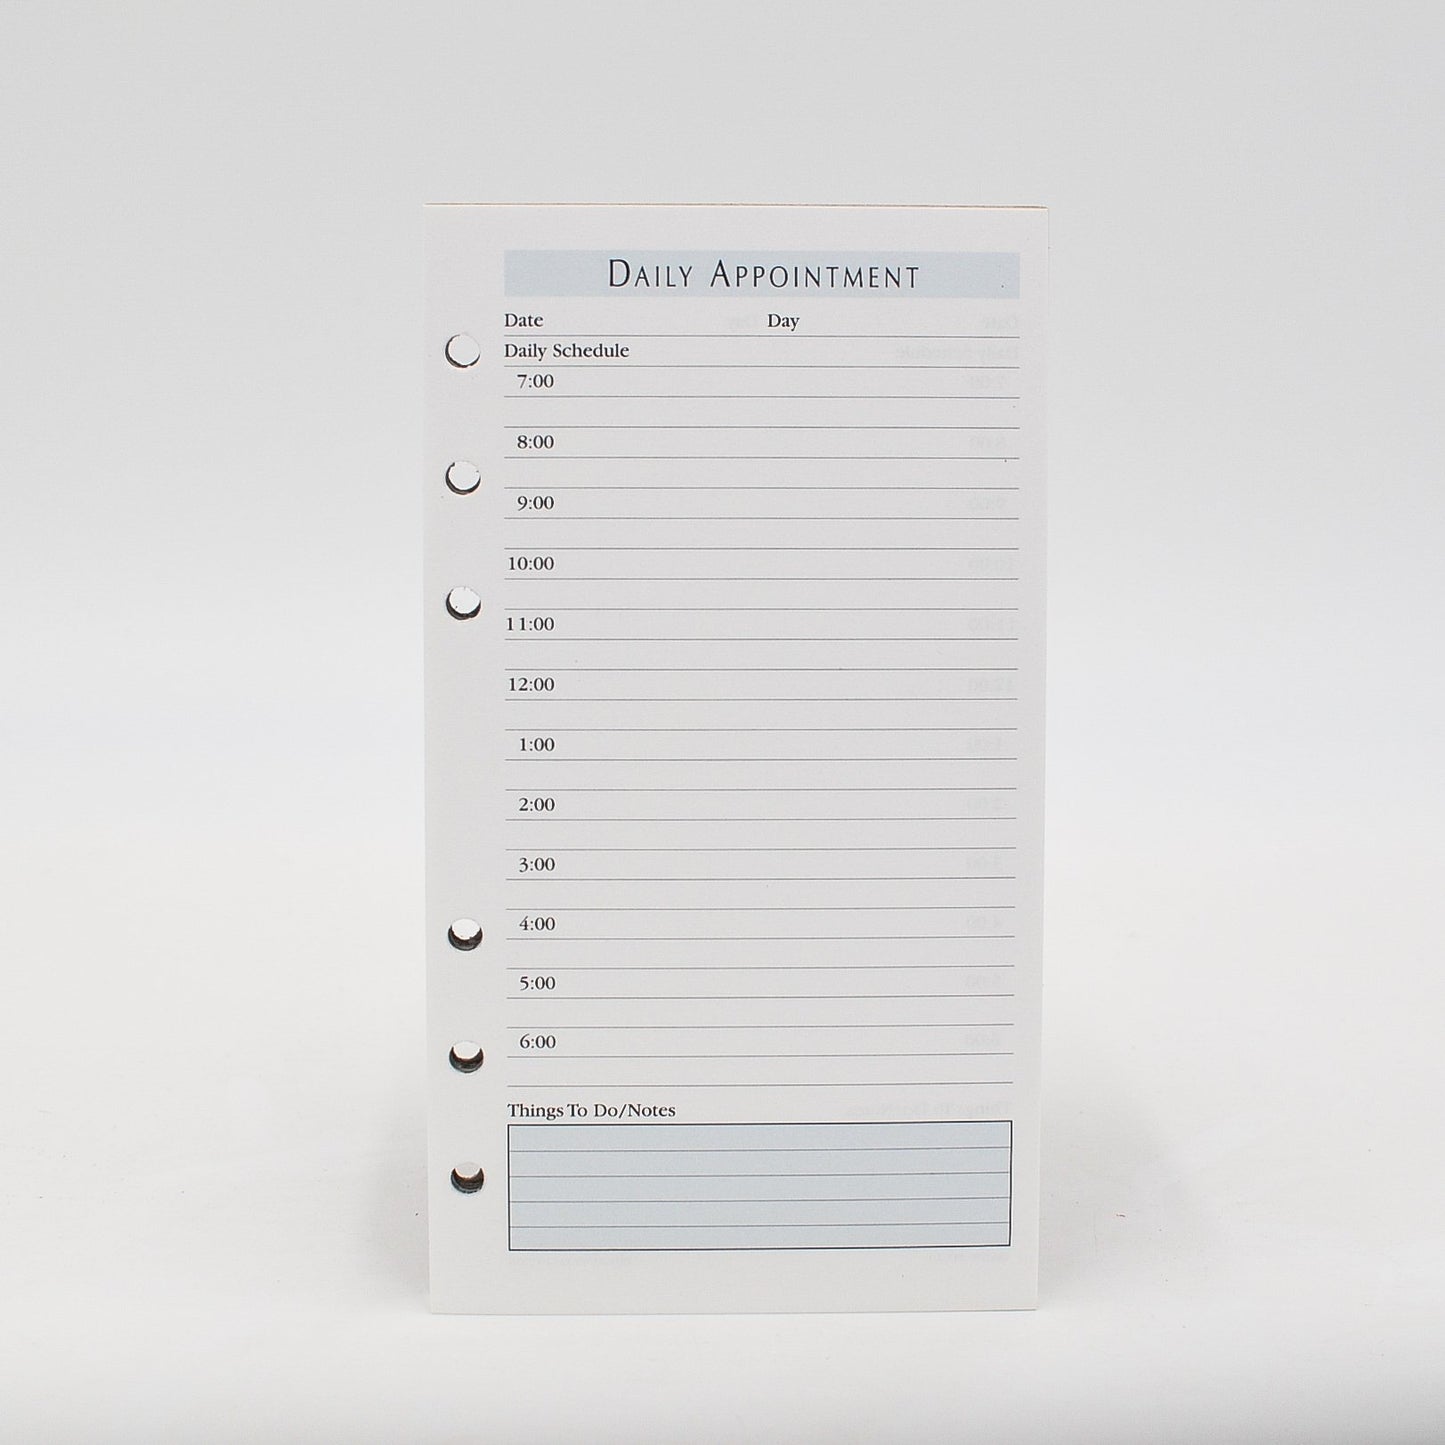 Daily Appointment Sheets: PC64AP6I 6-3/4" X 3-3/4" 6-Ring Loose Leaf Daily Appointment Refill  Ivory paper. Size 6-3/4" X 3-3/4"  6-Ring 50 Daily Appointment Sheets  Compatible with: MP46P6, PD646I, MA46P6-13 Louis Vuitton